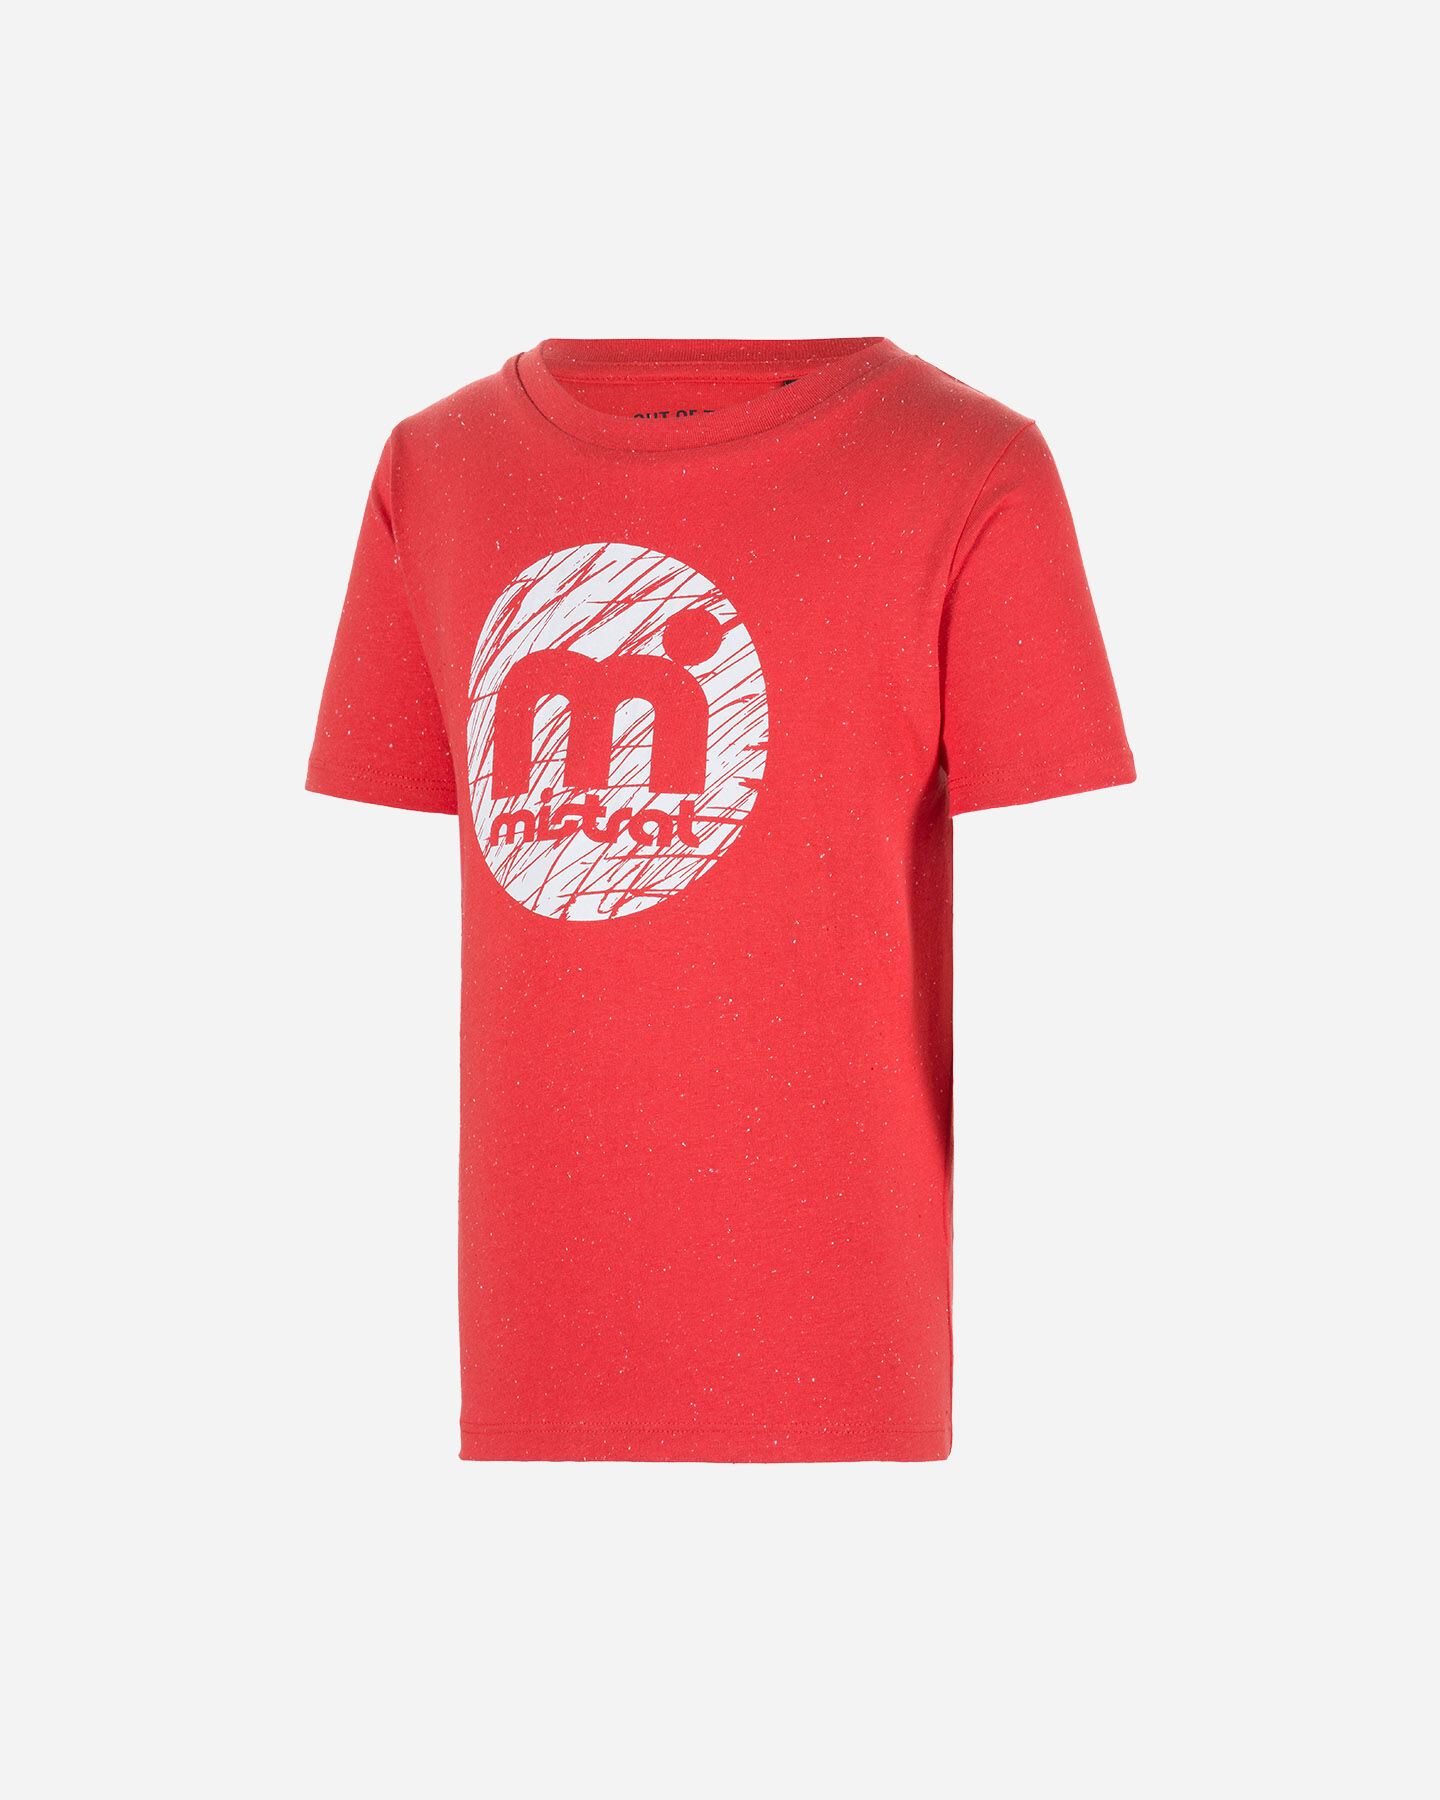  T-Shirt MISTRAL BASIC JR S4075832|255|8A scatto 0